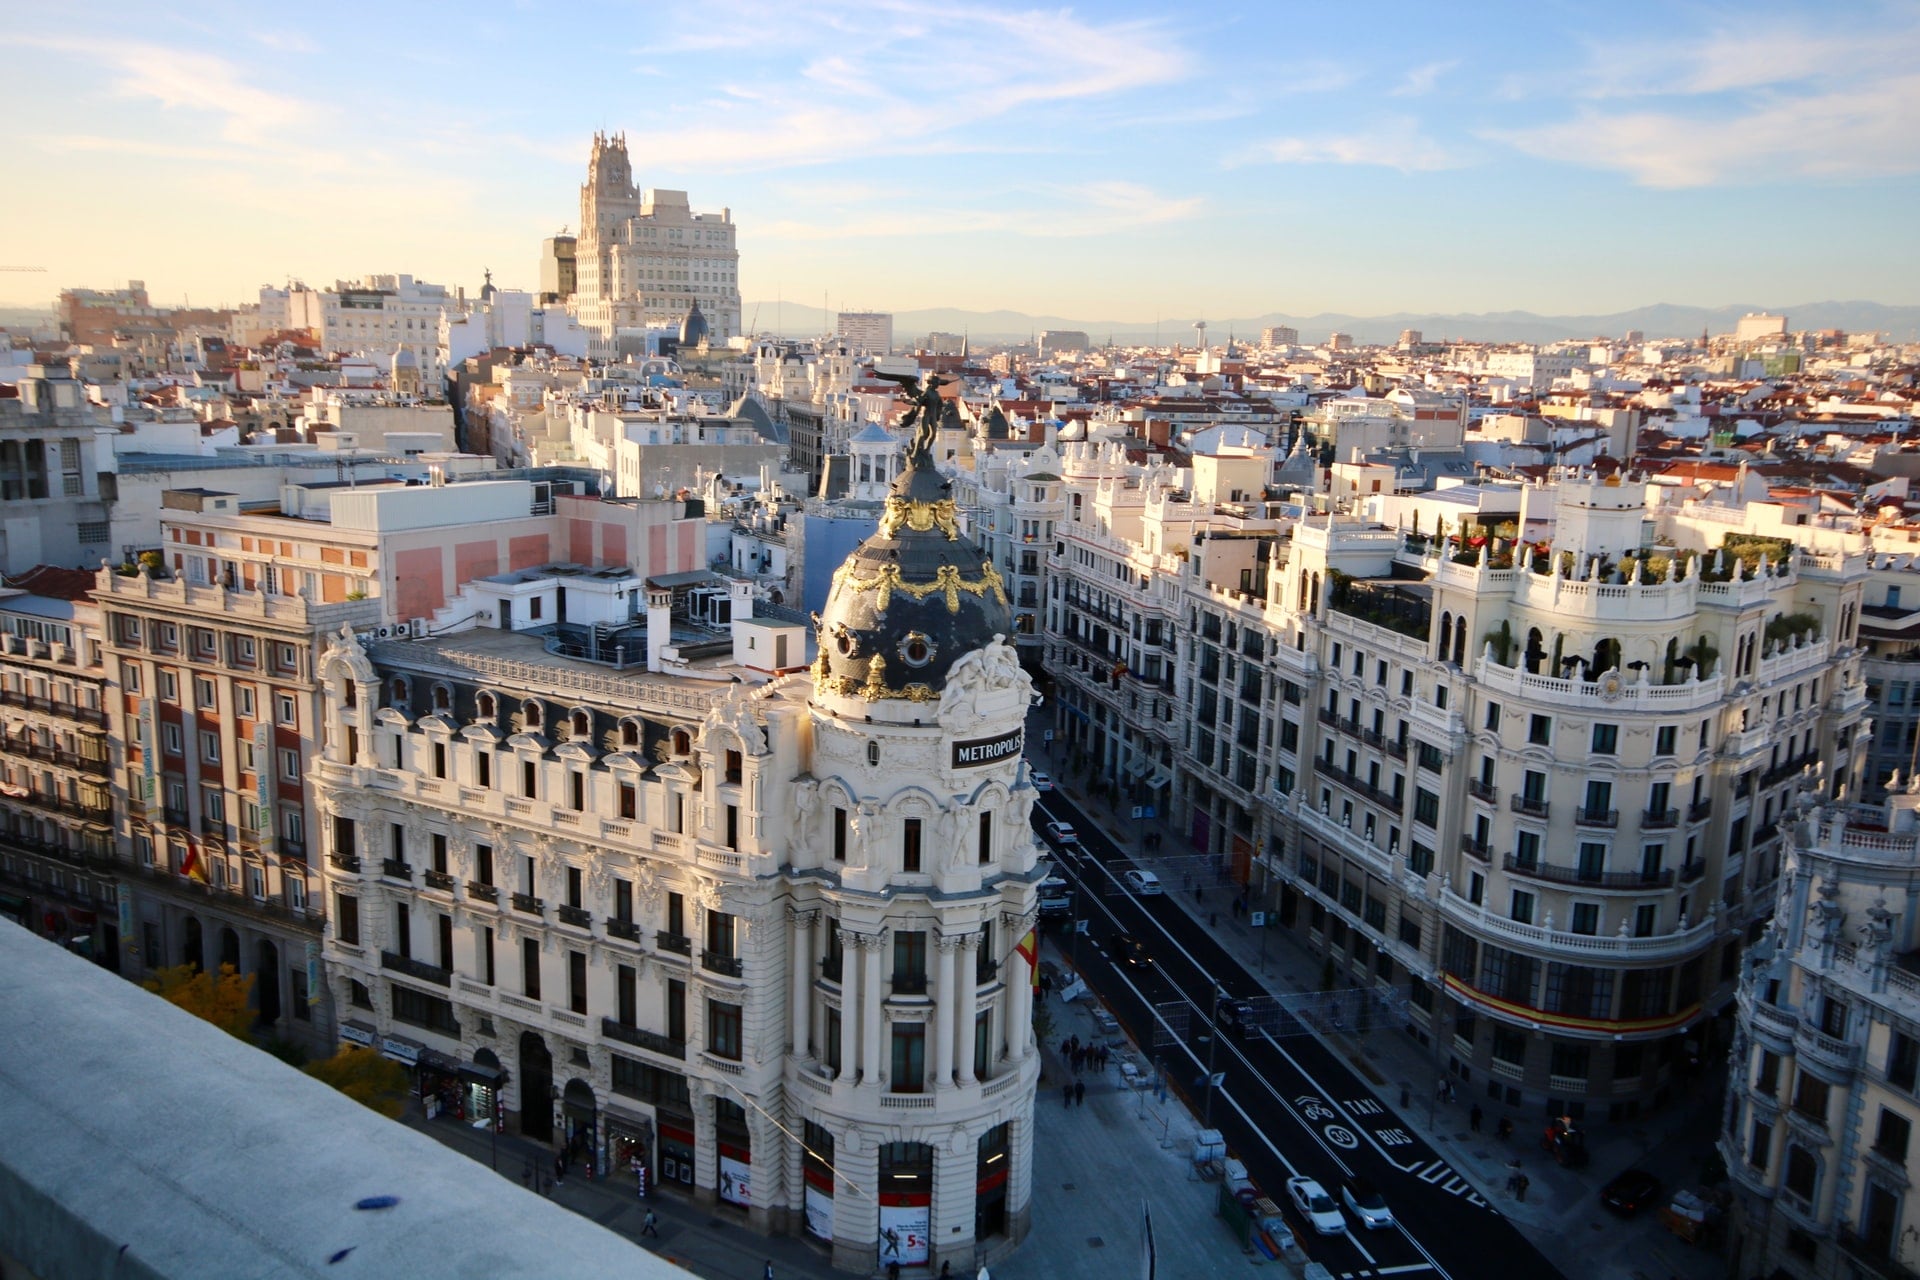 views-of-main-shopping-street-from-rooftop-above-gran-via-madrid-in-2-days-itinerary